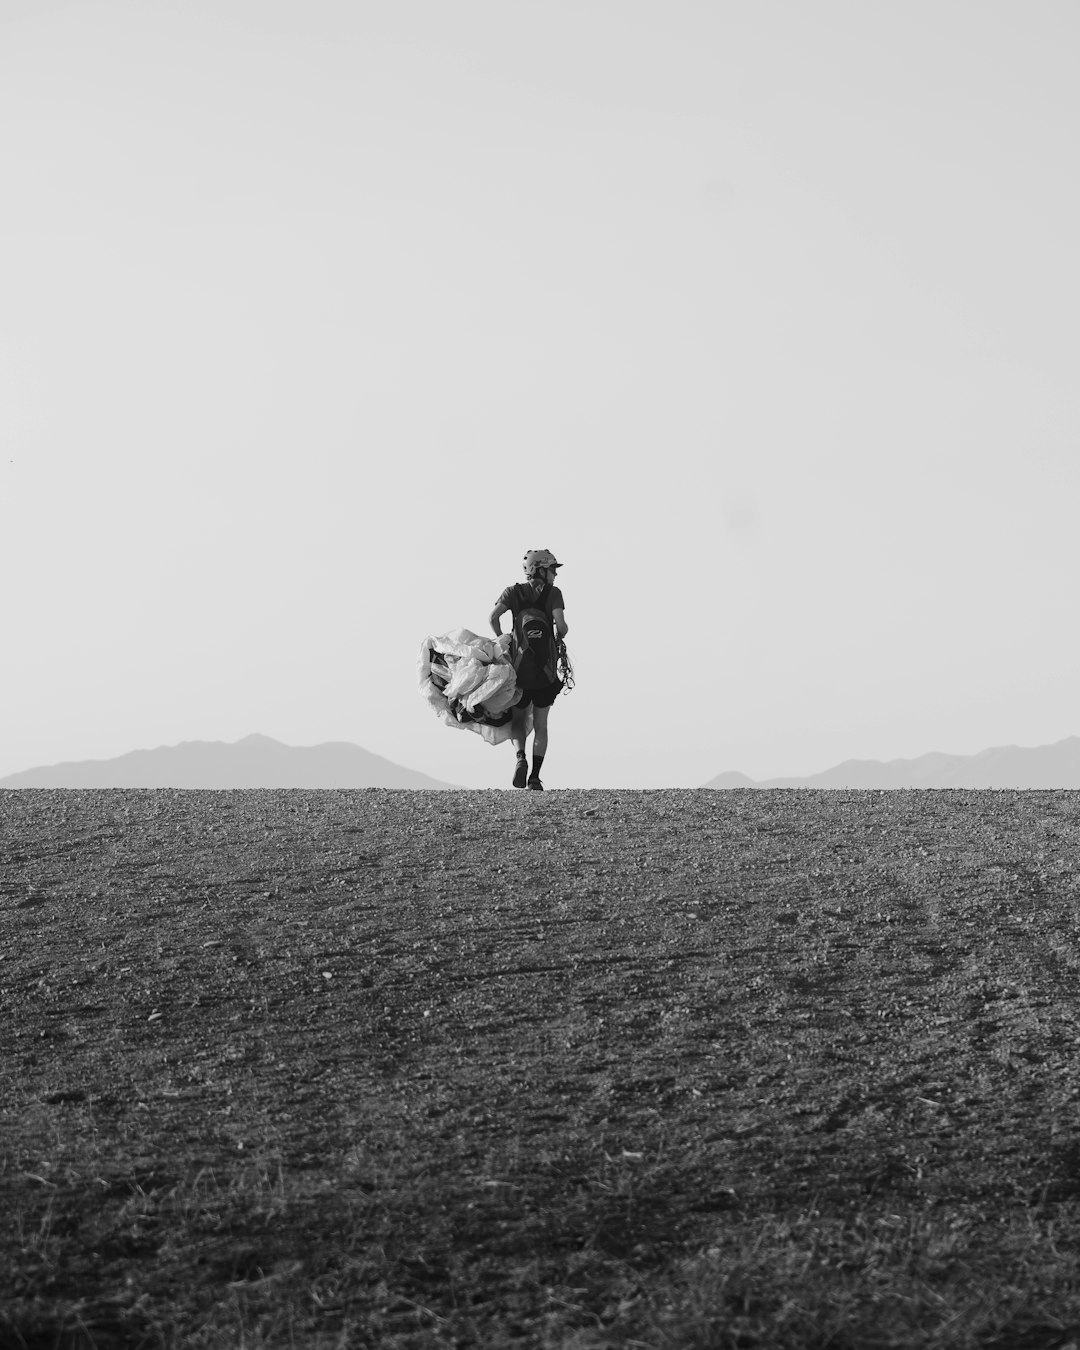 grayscale photo of man riding horse on field